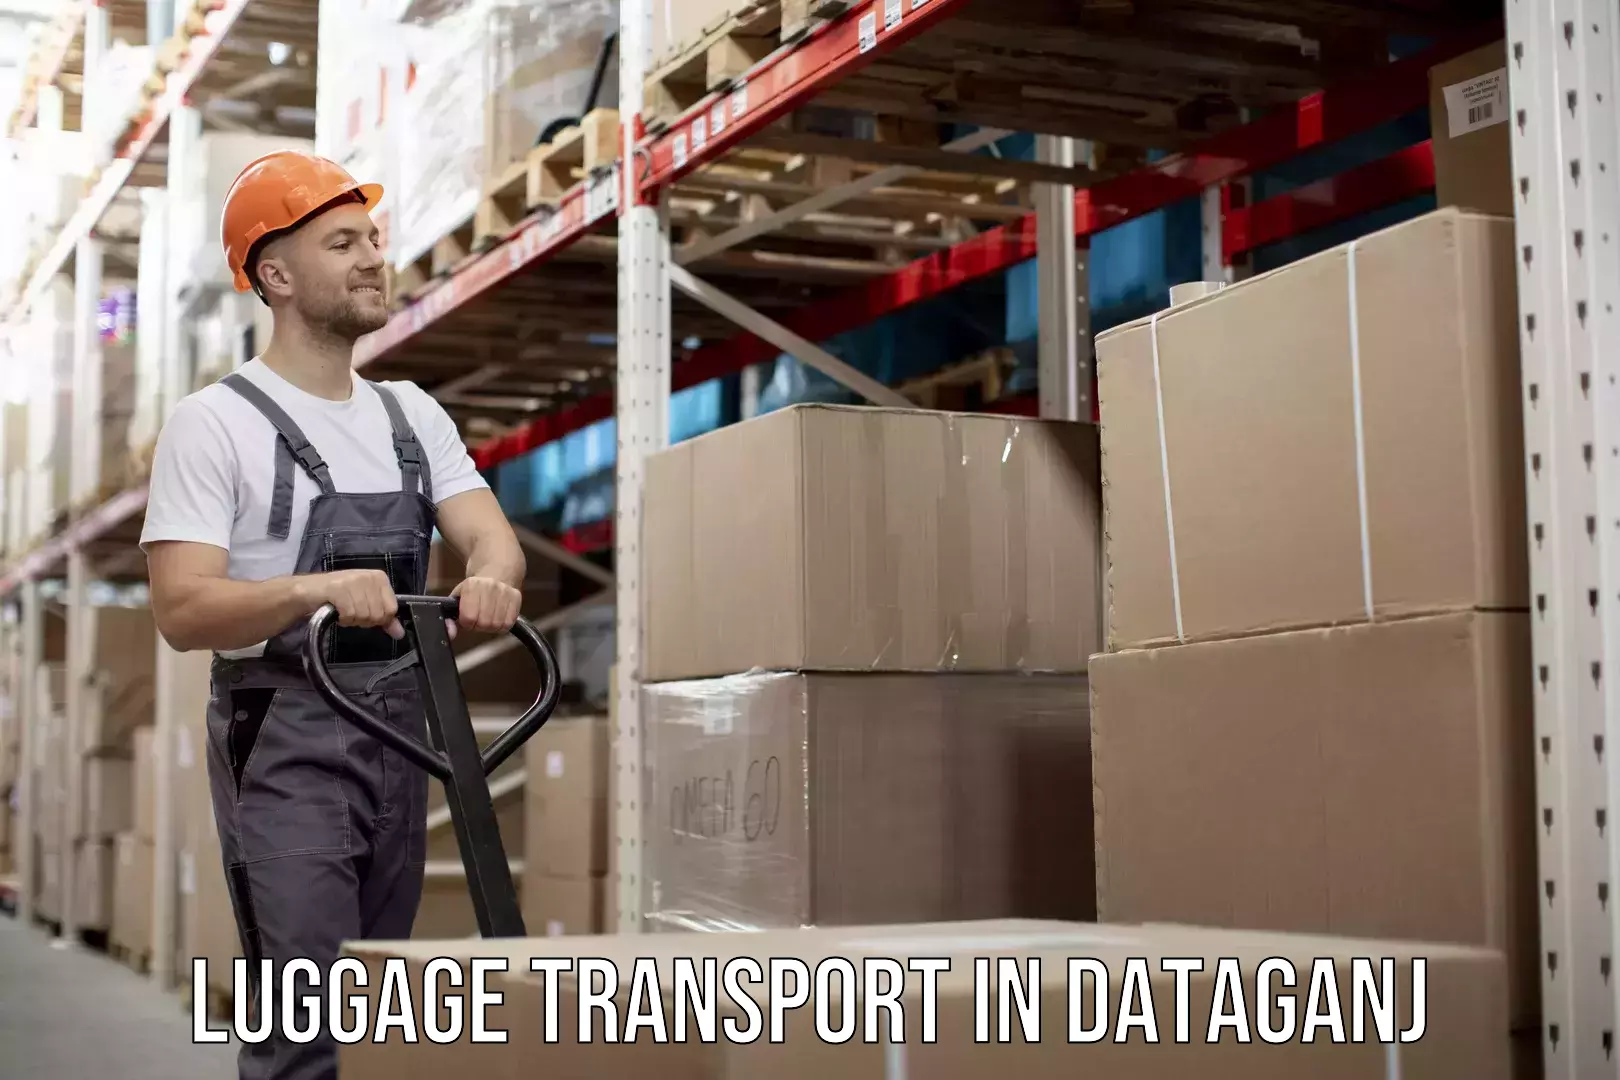 Luggage delivery rates in Dataganj